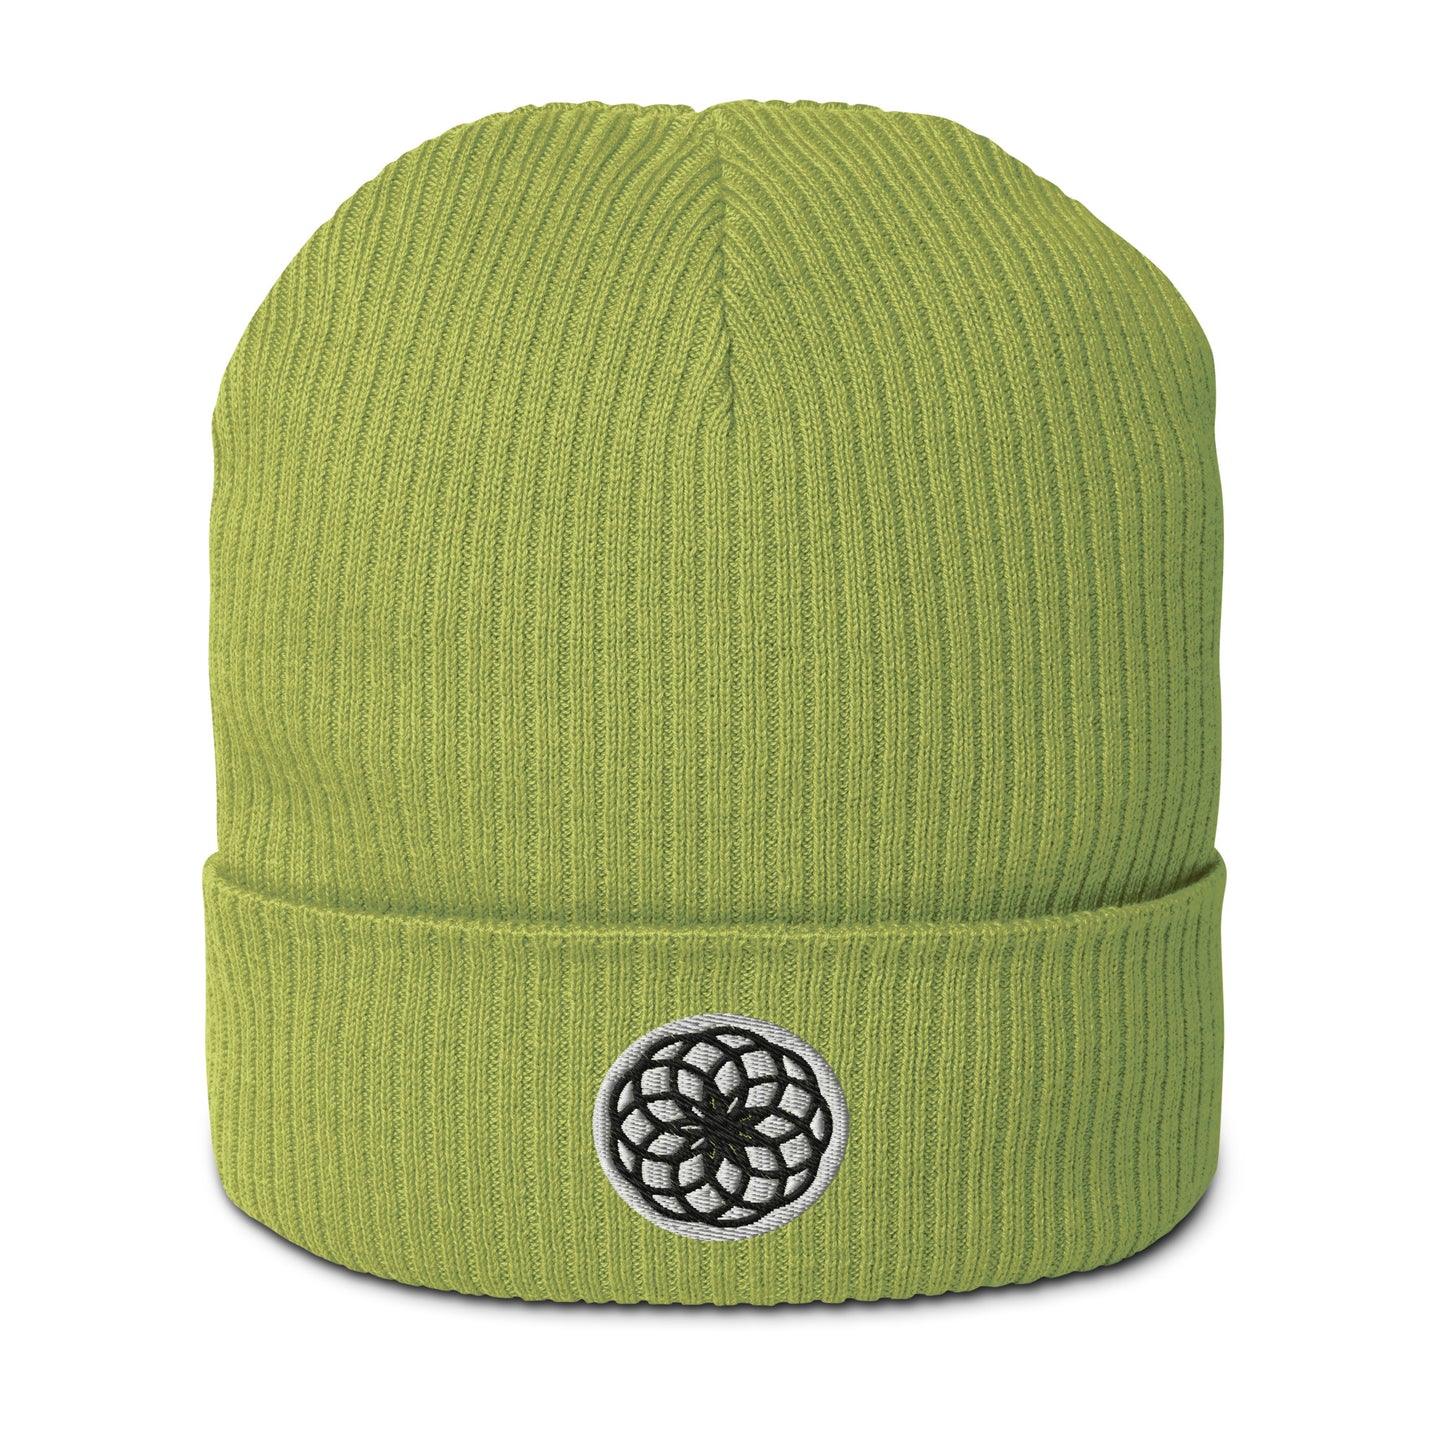 Check out our Organic Cotton Lotus of Life Beanie in Apple Green. Made from organic cotton and featuring a Lotus of Life embroidery, it's not your average hat. It's about purity, growth, and embracing life. Plus, it's made of breathable and lightweight natural fabric, so you can stay comfy wherever your journey takes you. Grab one and add a laid-back, high vibe touch to your style.